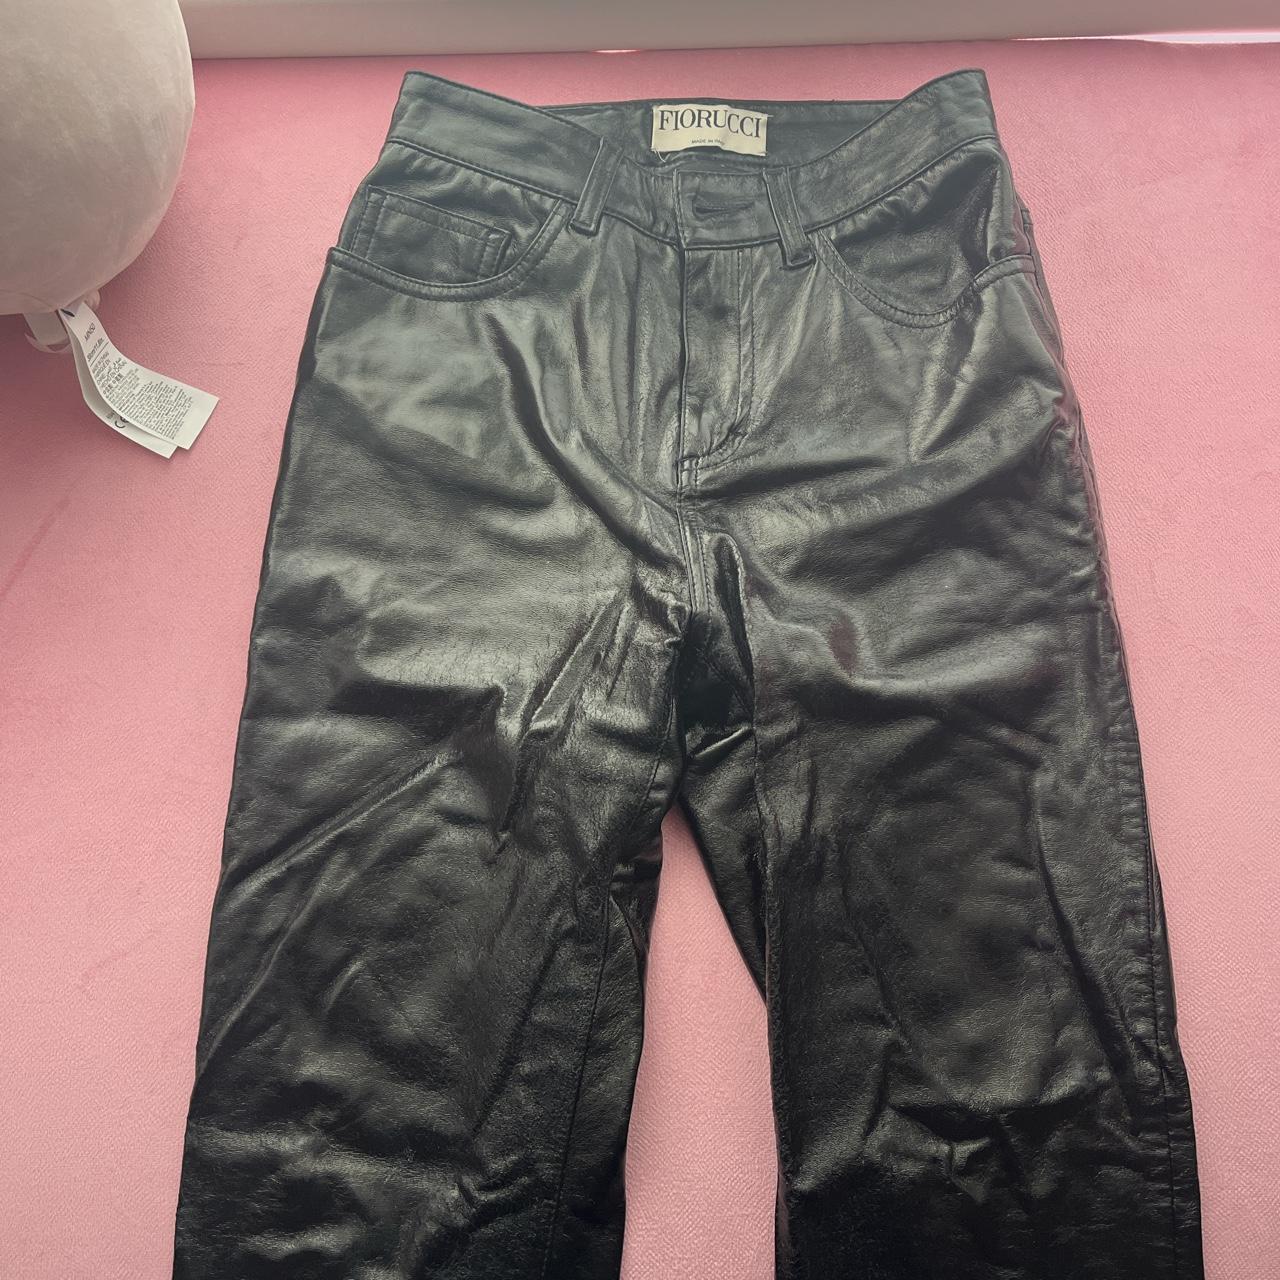 real leather patent look fiorucci pants. i bought... - Depop